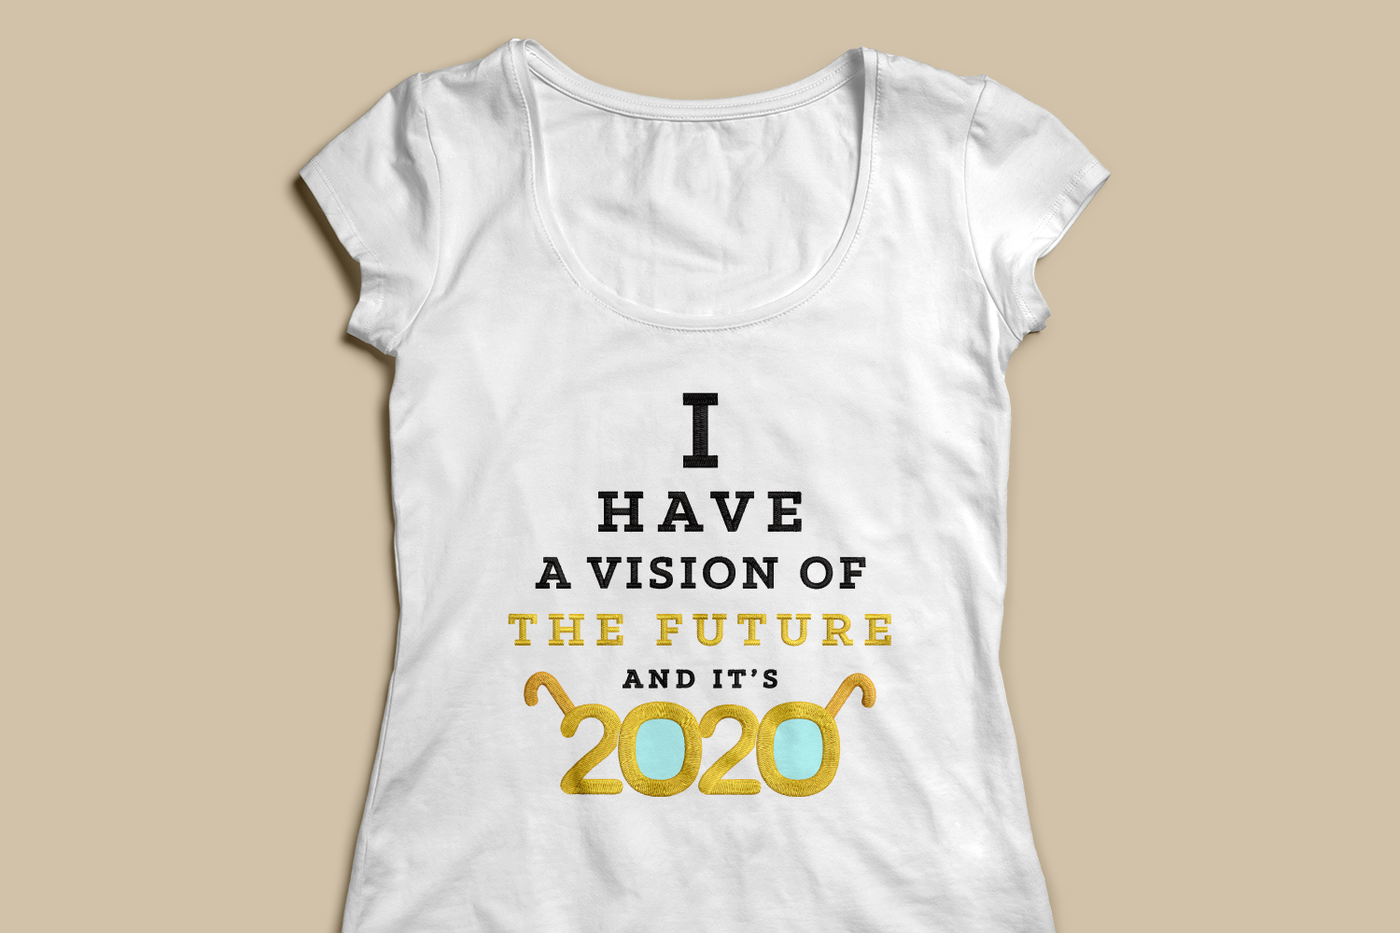 A white scoopneck tee sits on a beige background. There is an embroidered design that says "I have a vision of the future and it's 2020. The letters look like an eye chart and the 2020 has arms to look like glasses.